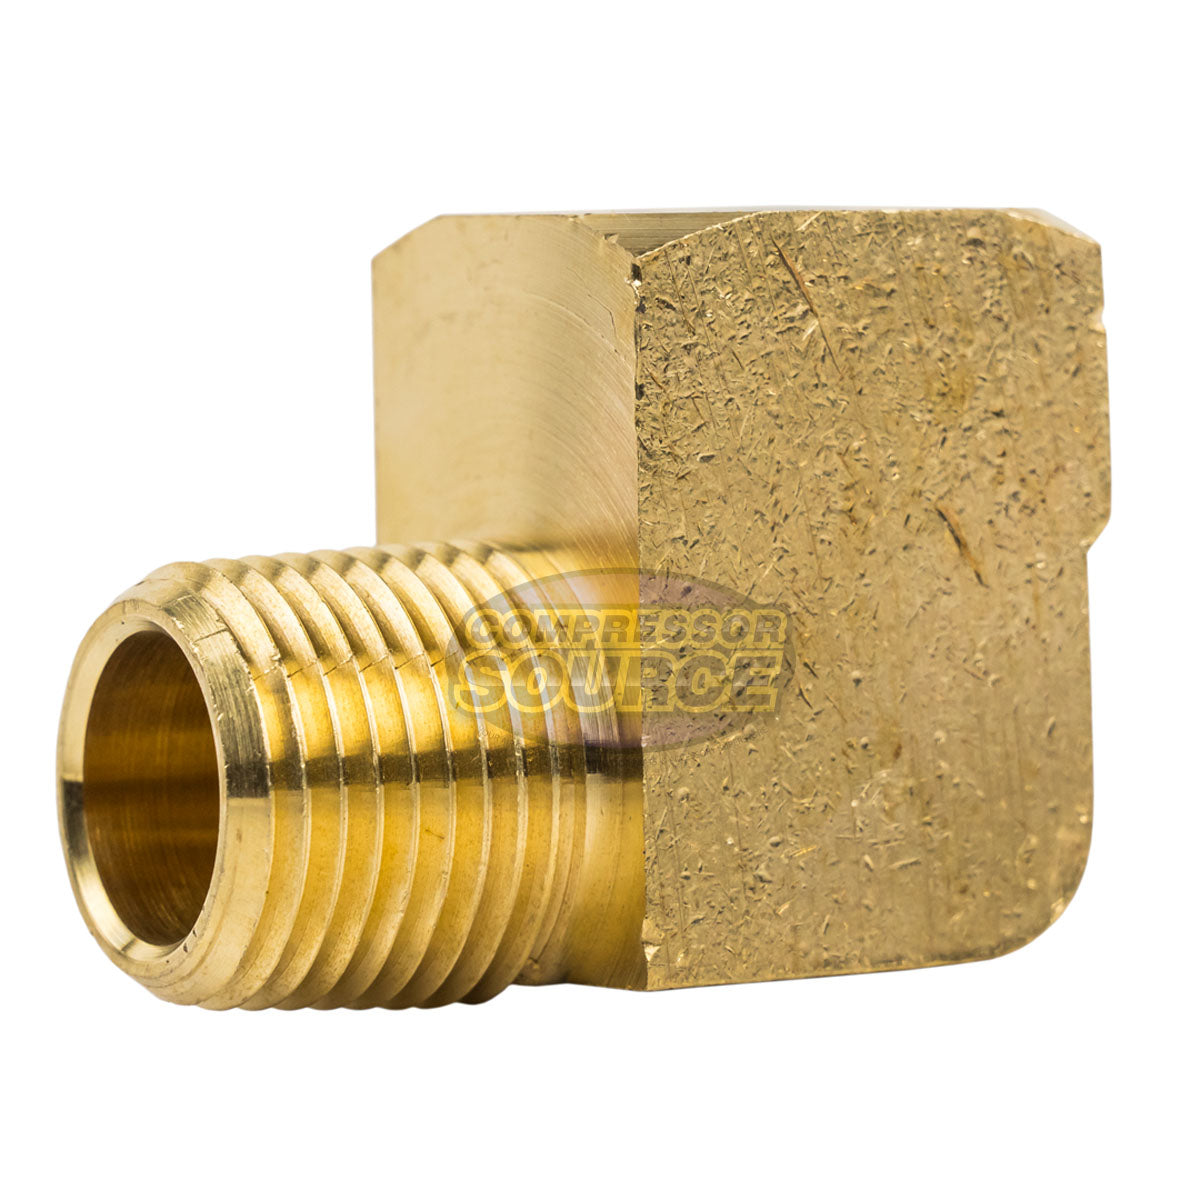 Street Elbow 90 Degree 1/2" Male NPT x 1/2" Female NPT Pipe Connector 2-Pack